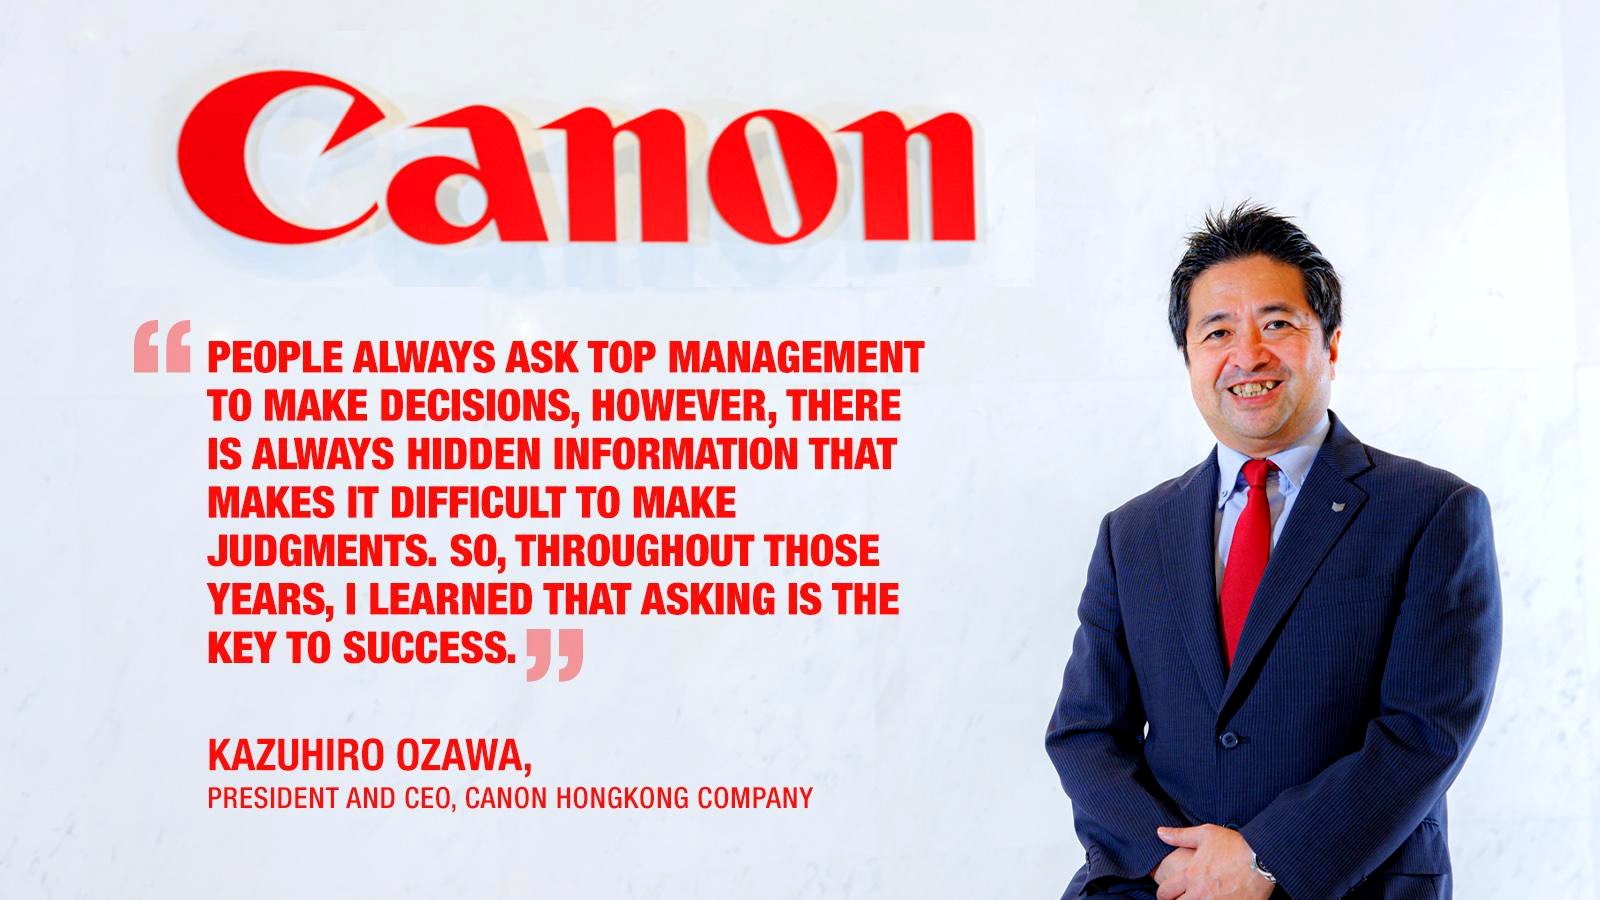 Suite Talk: The first step to being a successful leader is to ask, shares Kazuhiro Ozawa, President and CEO, Canon Hongkong Company